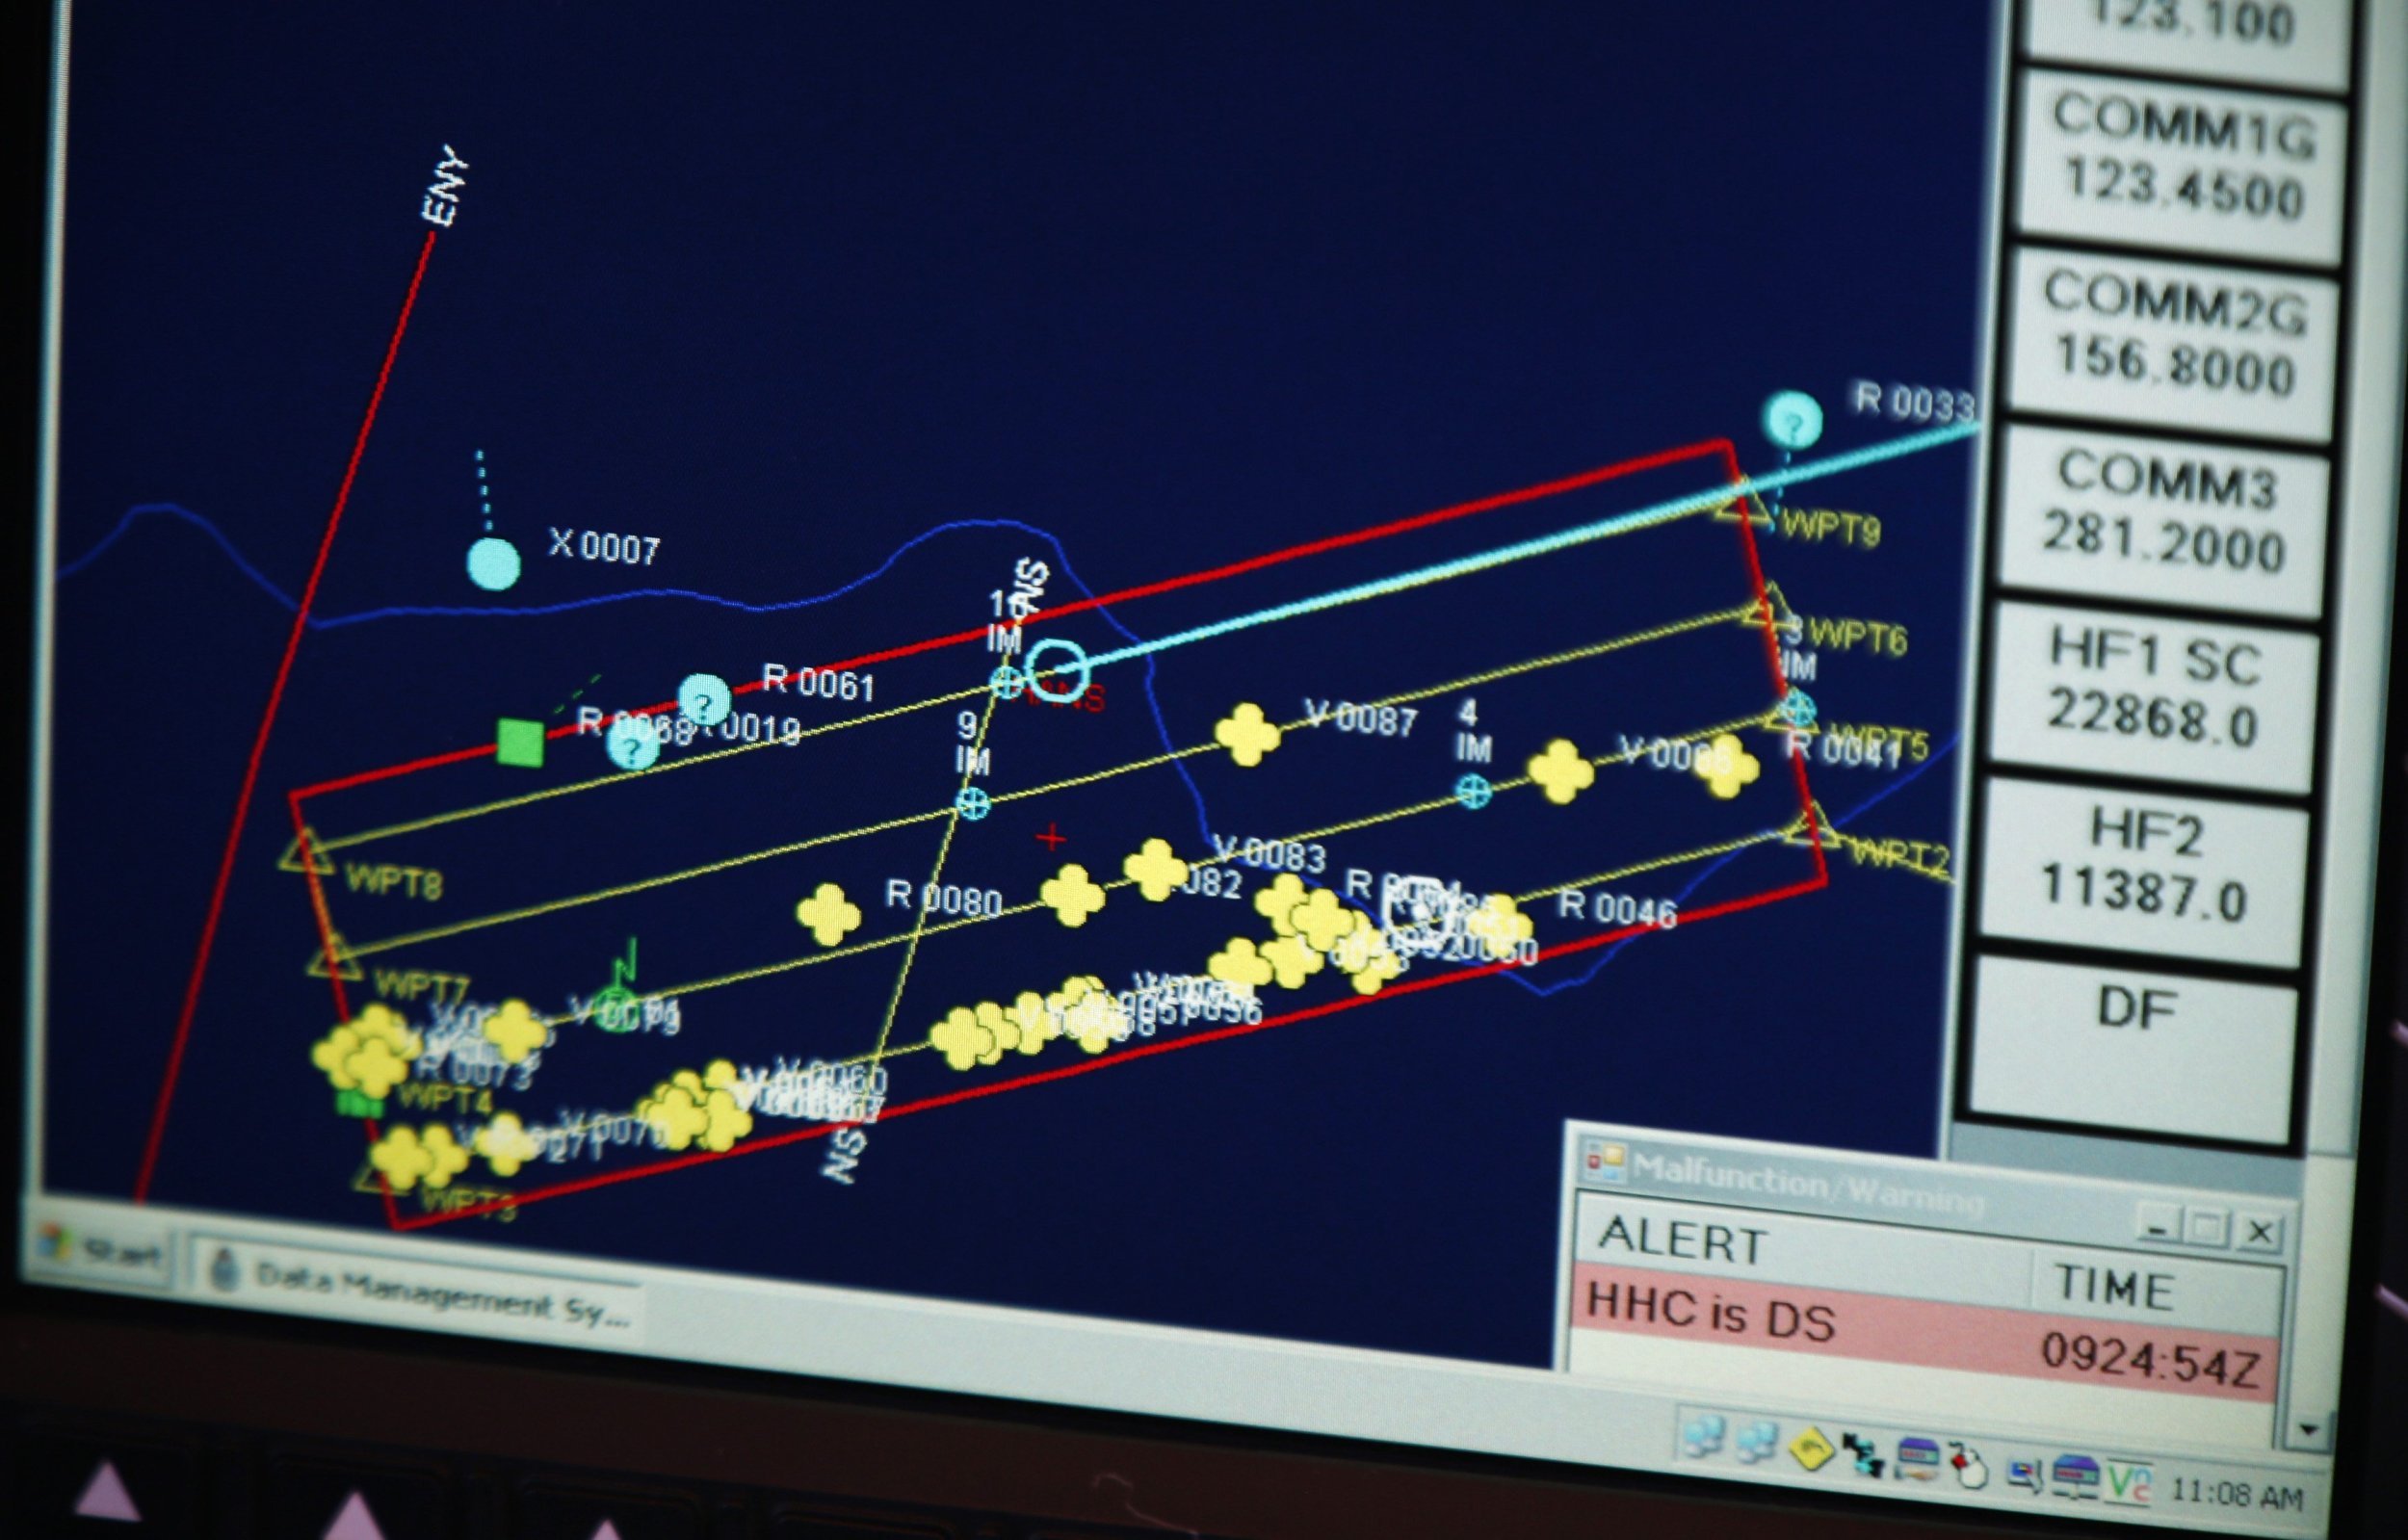 MH370 search screen March 29